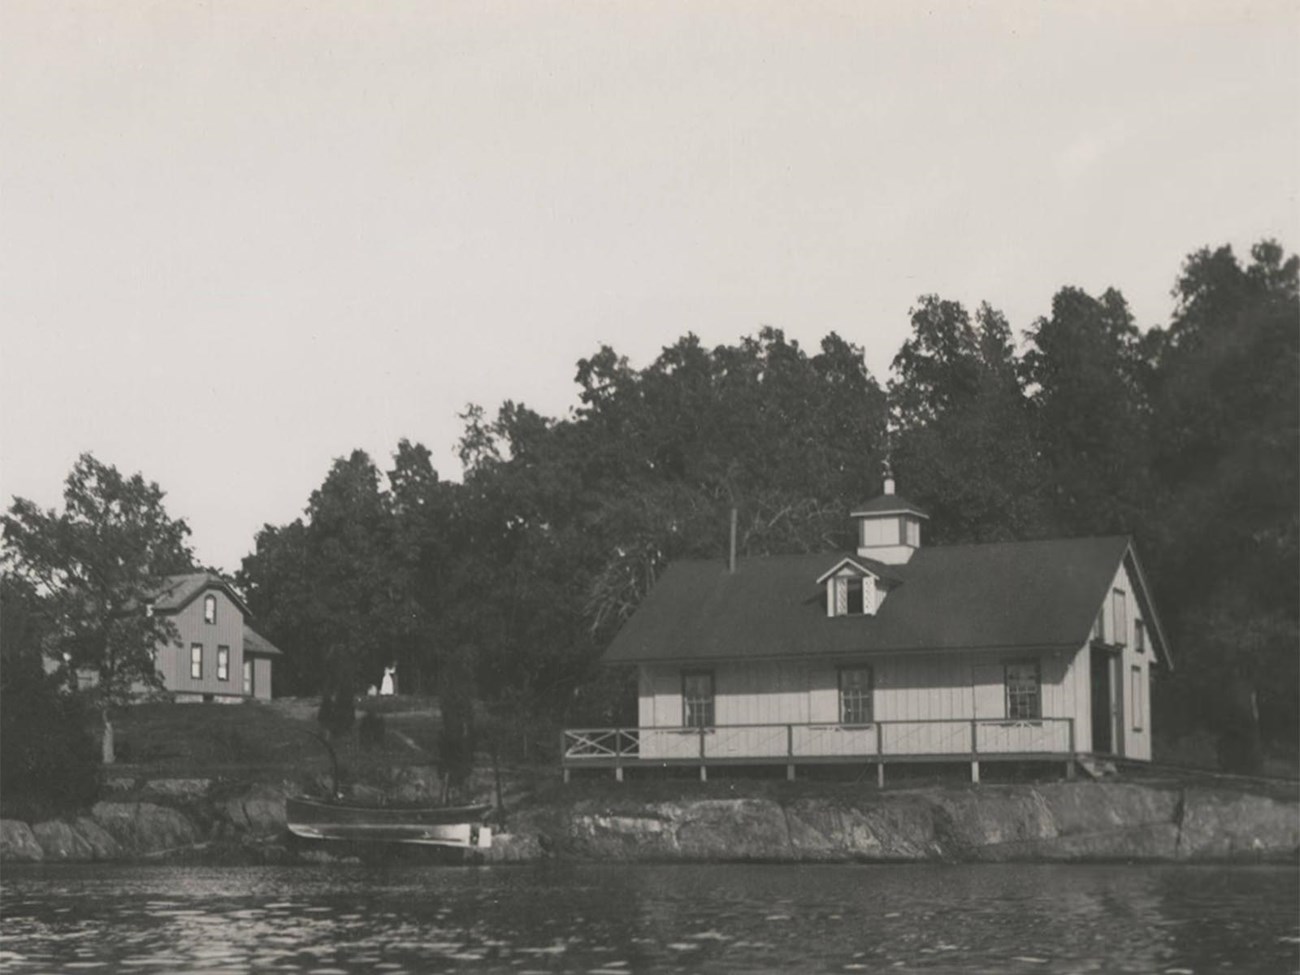 A black and white photograph of a wooden building on the shore of a river.